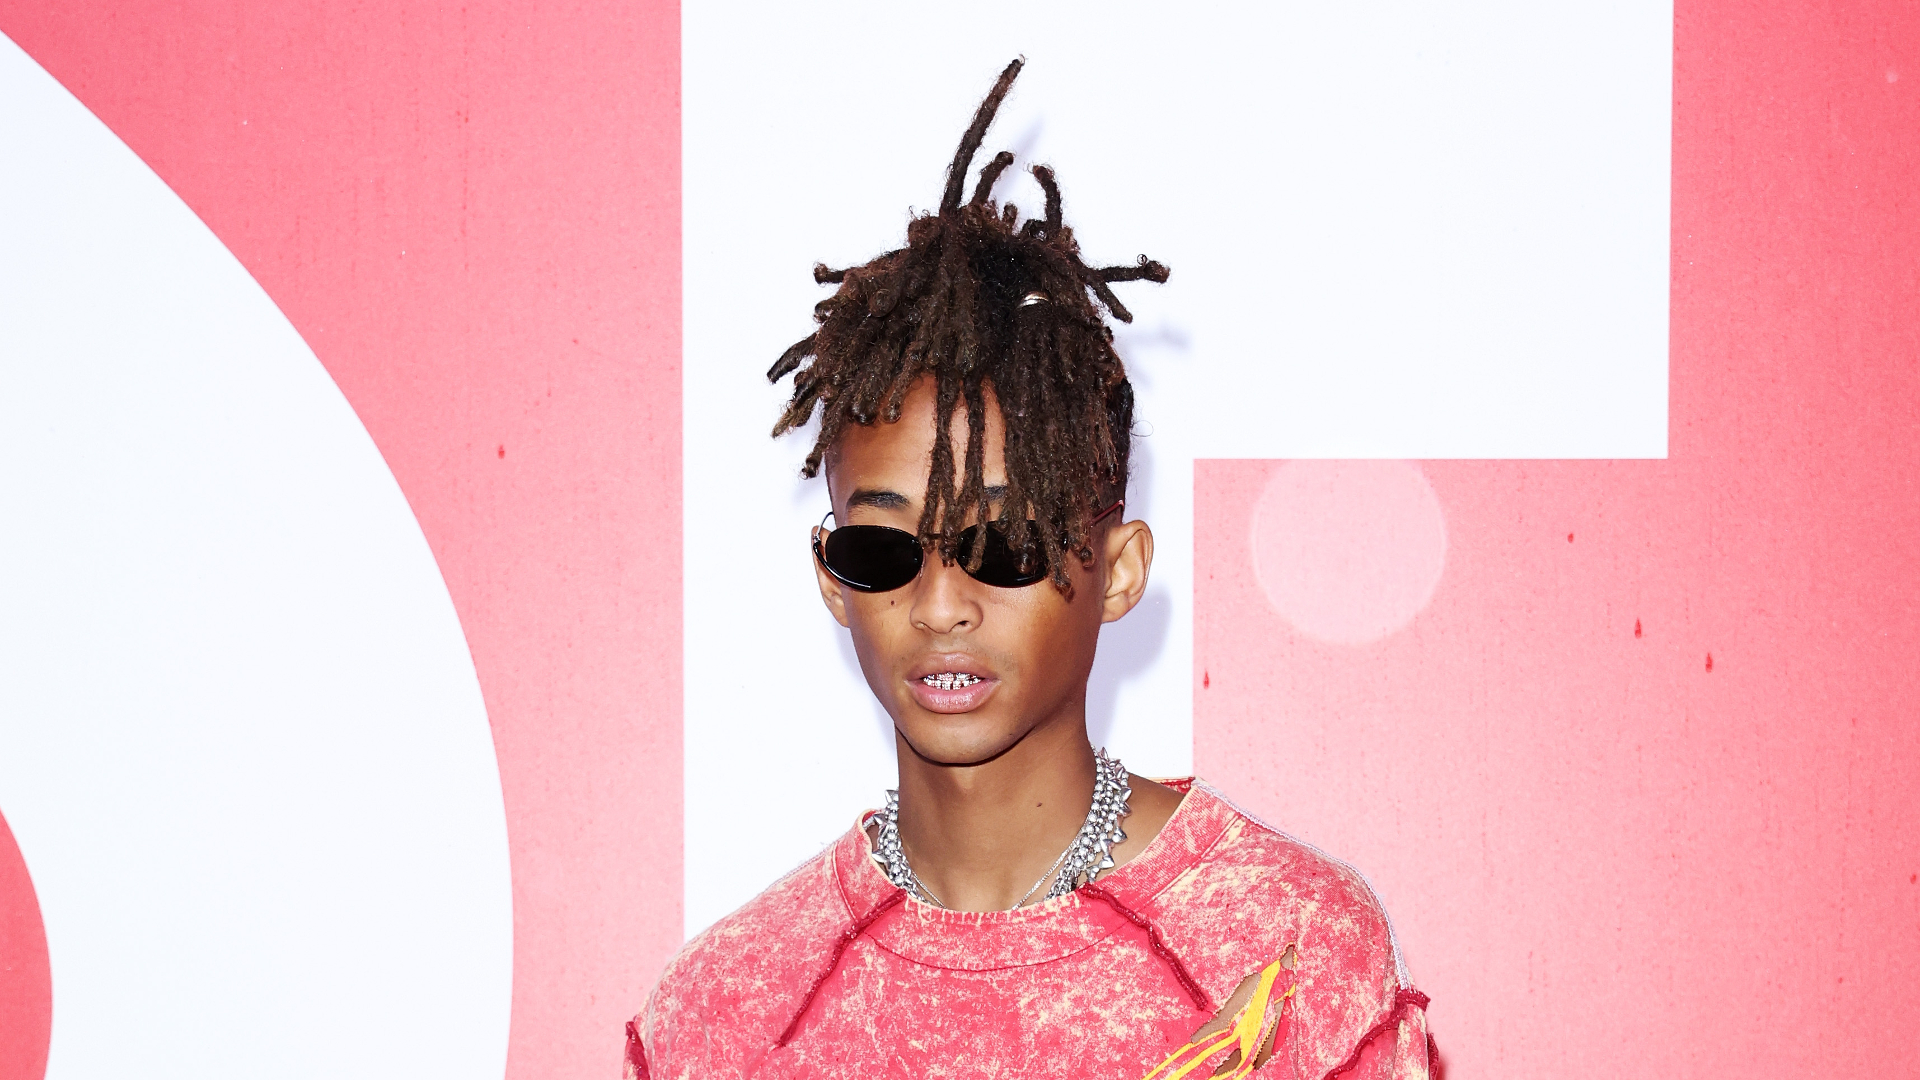 Jaden Smith hastily deletes dozens of posts late at night as concerned fans  say 'uh oh' after weeks of worrying behavior